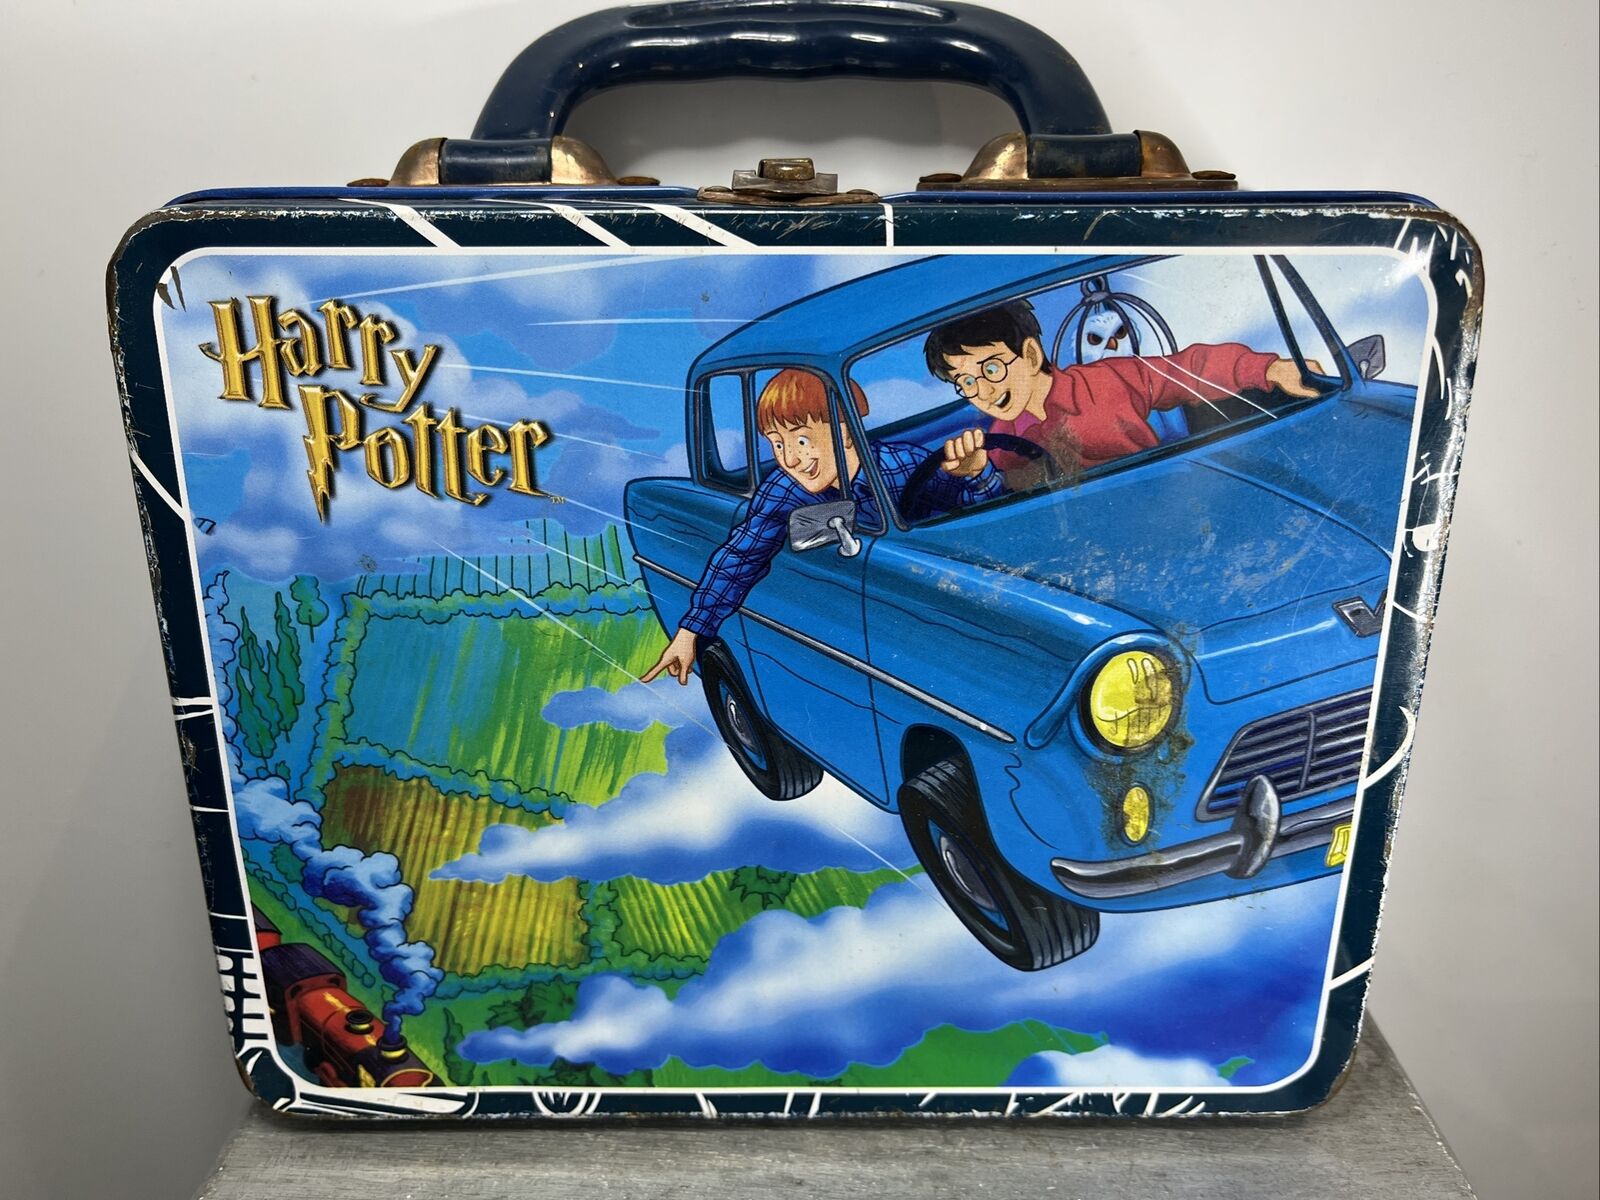 Harry Potter Lunch Box Vintage Rare EMPTY Collectible Tin Storage Container /.